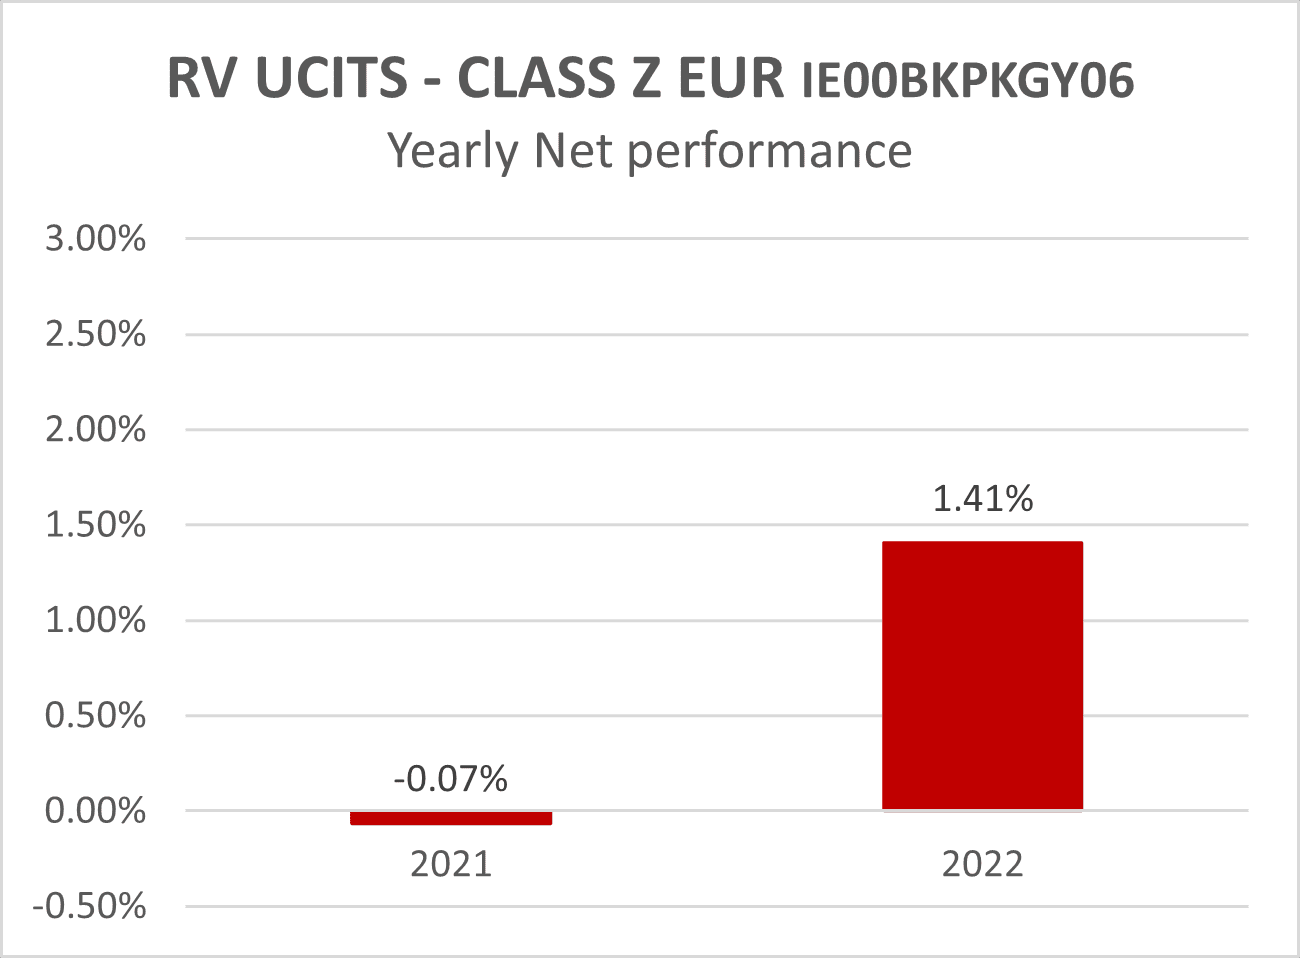 RV UCITS - CLASS Z EUR IE00BKPKGY06 - Yearly Net performance